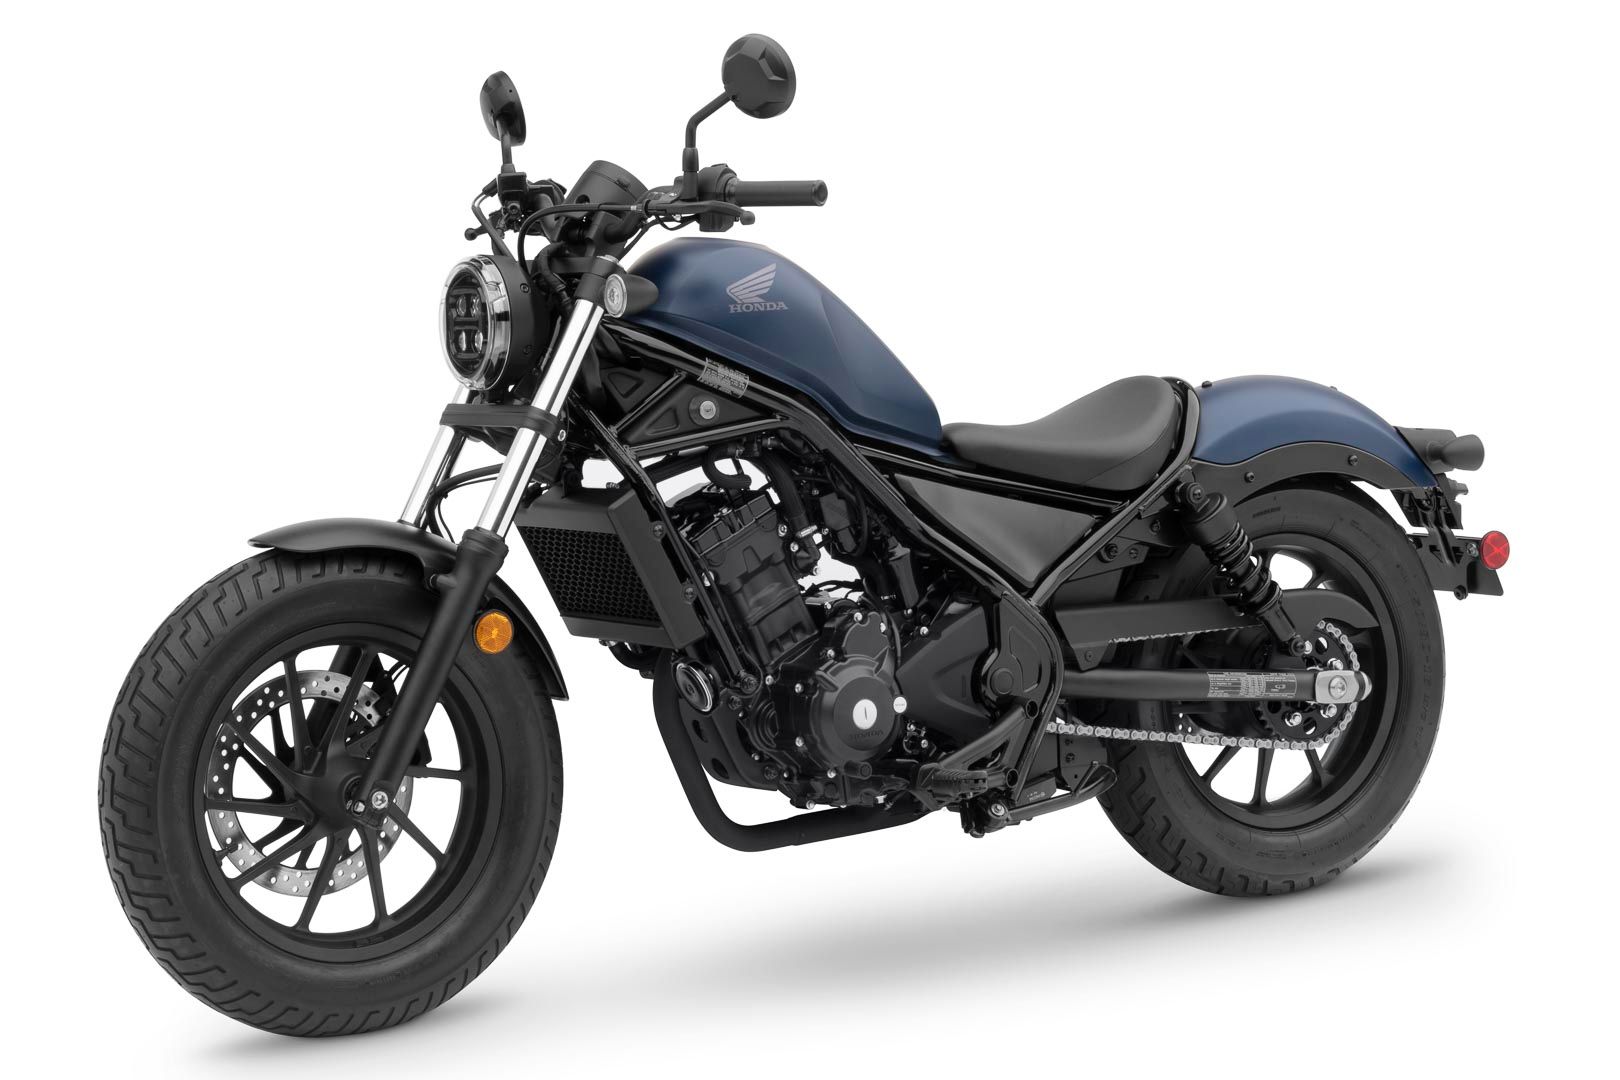 Top 10 Starter Motorcycles for the U.S. Market